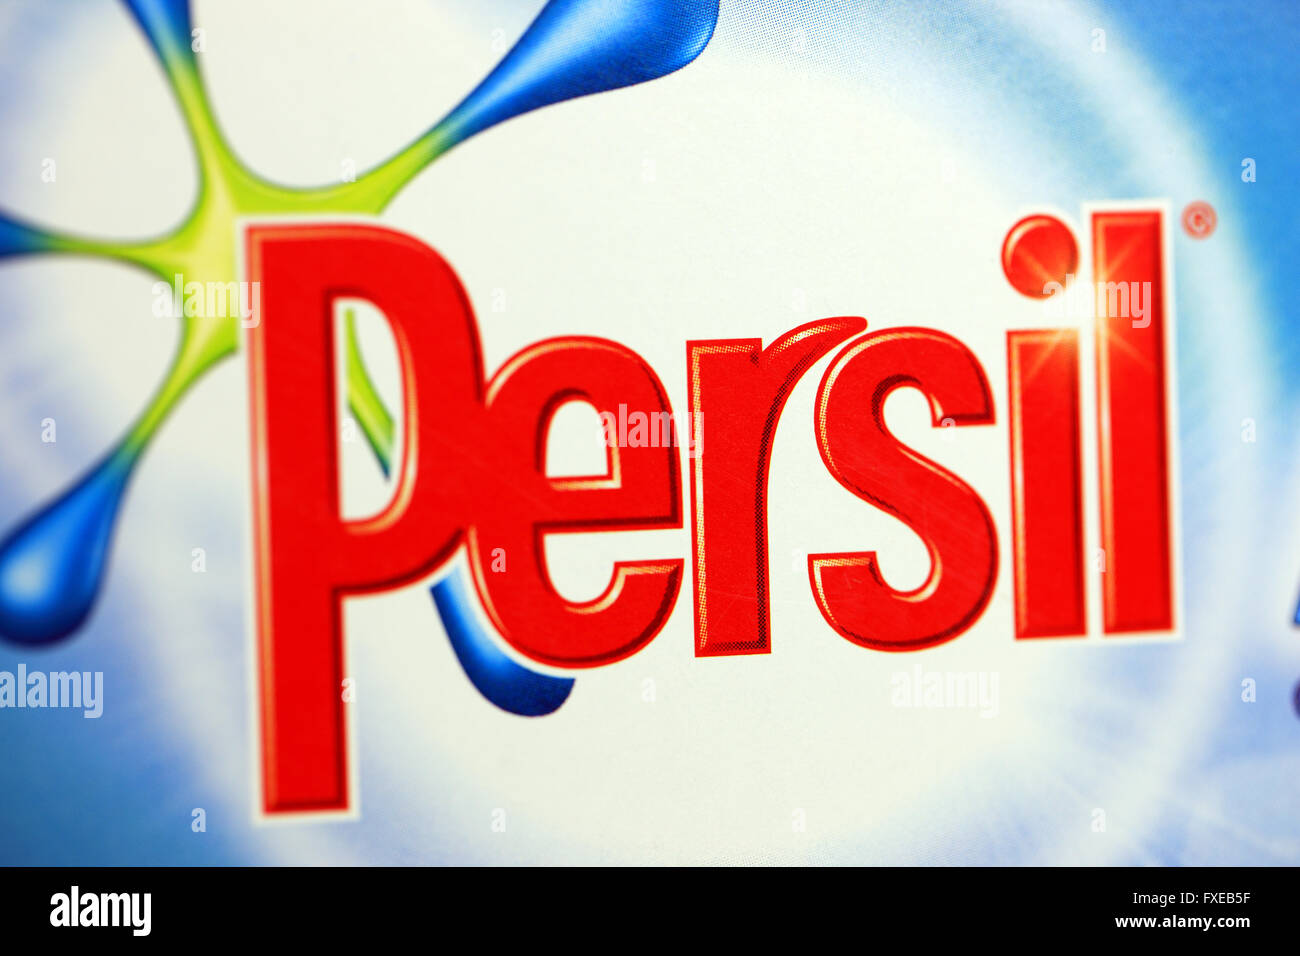 Persil logo closeup of laundry detergent packaging Stock Photo